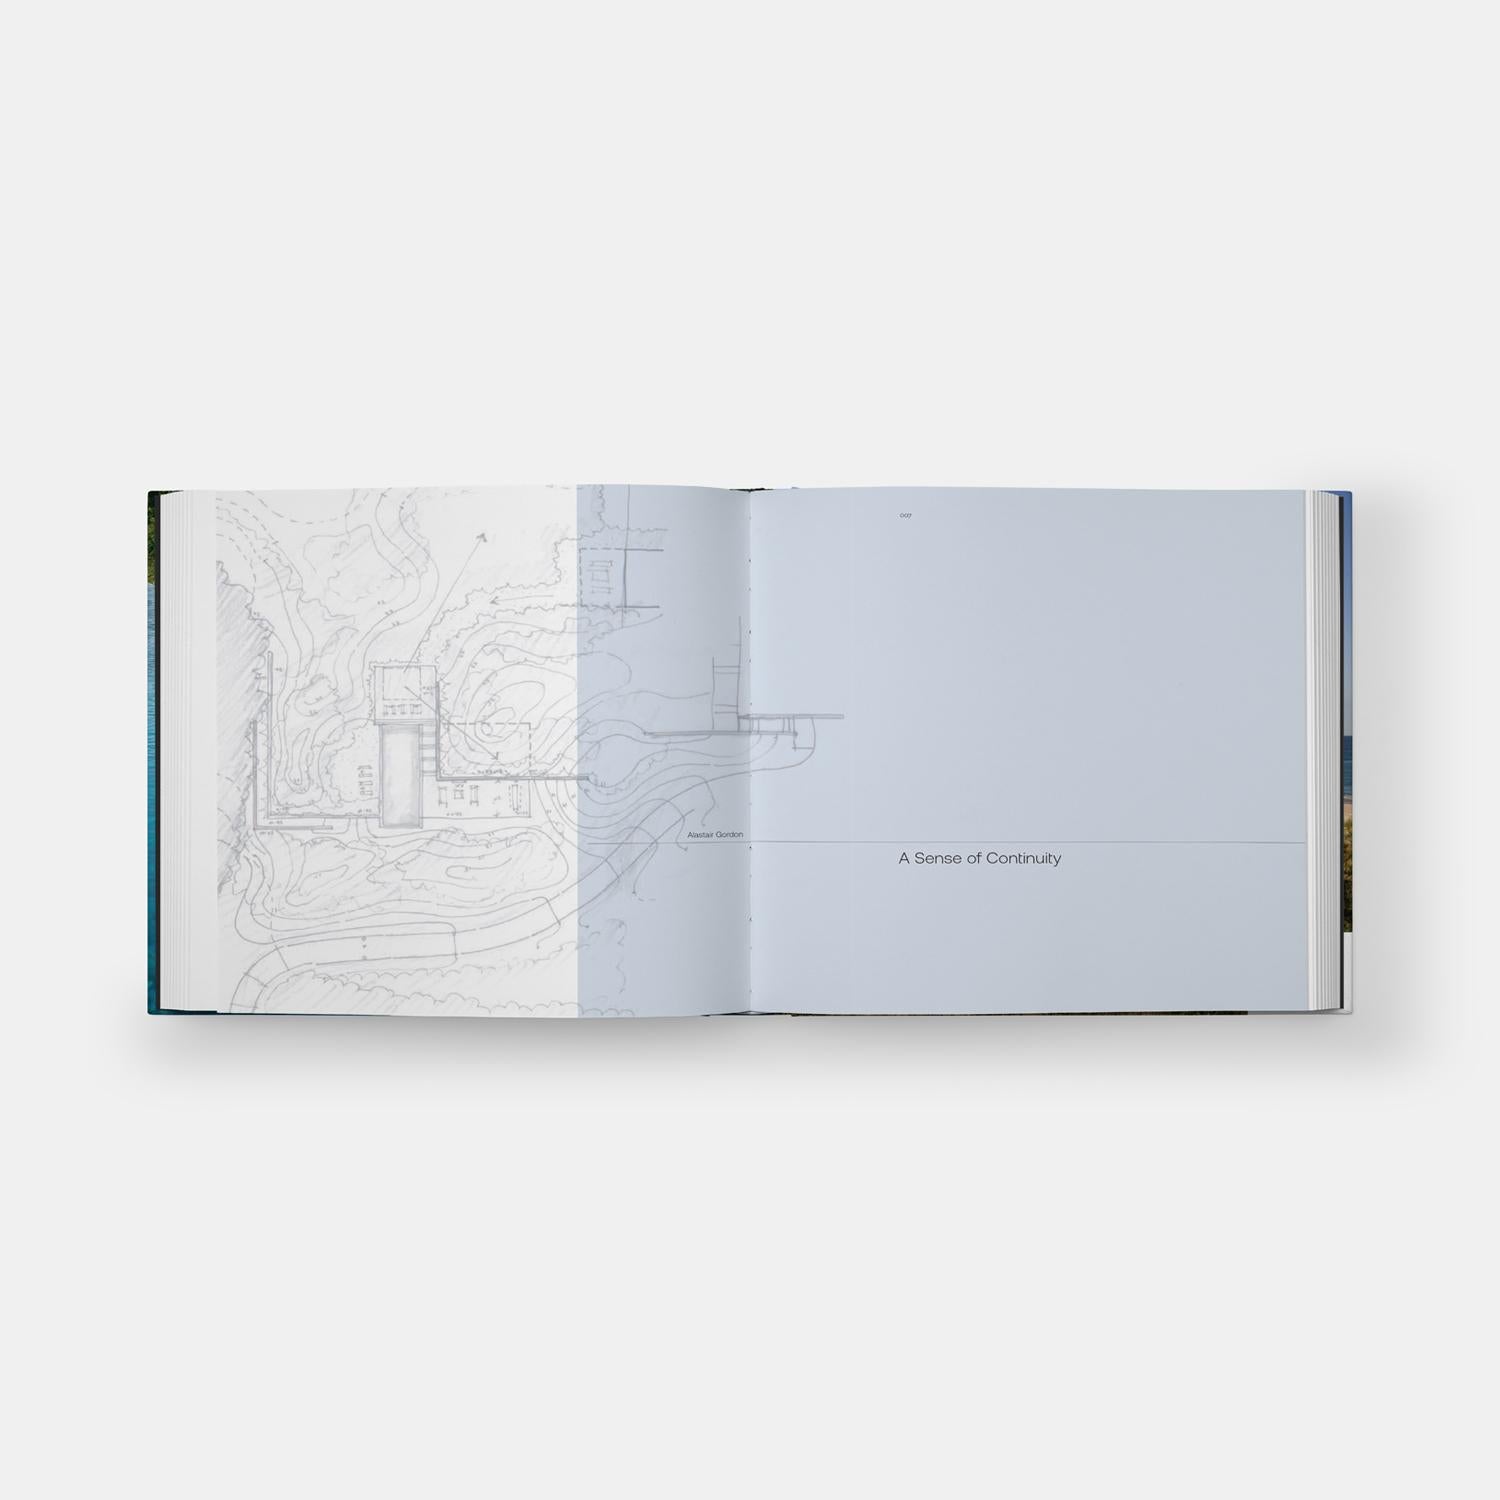 First monograph to present the work of LaGuardia Design Group, a highly regarded landscape architecture firm specializing in contemporary residential design in the Hamptons.

With offices in Water Mill, LaGuardia Design Group is immersed in the